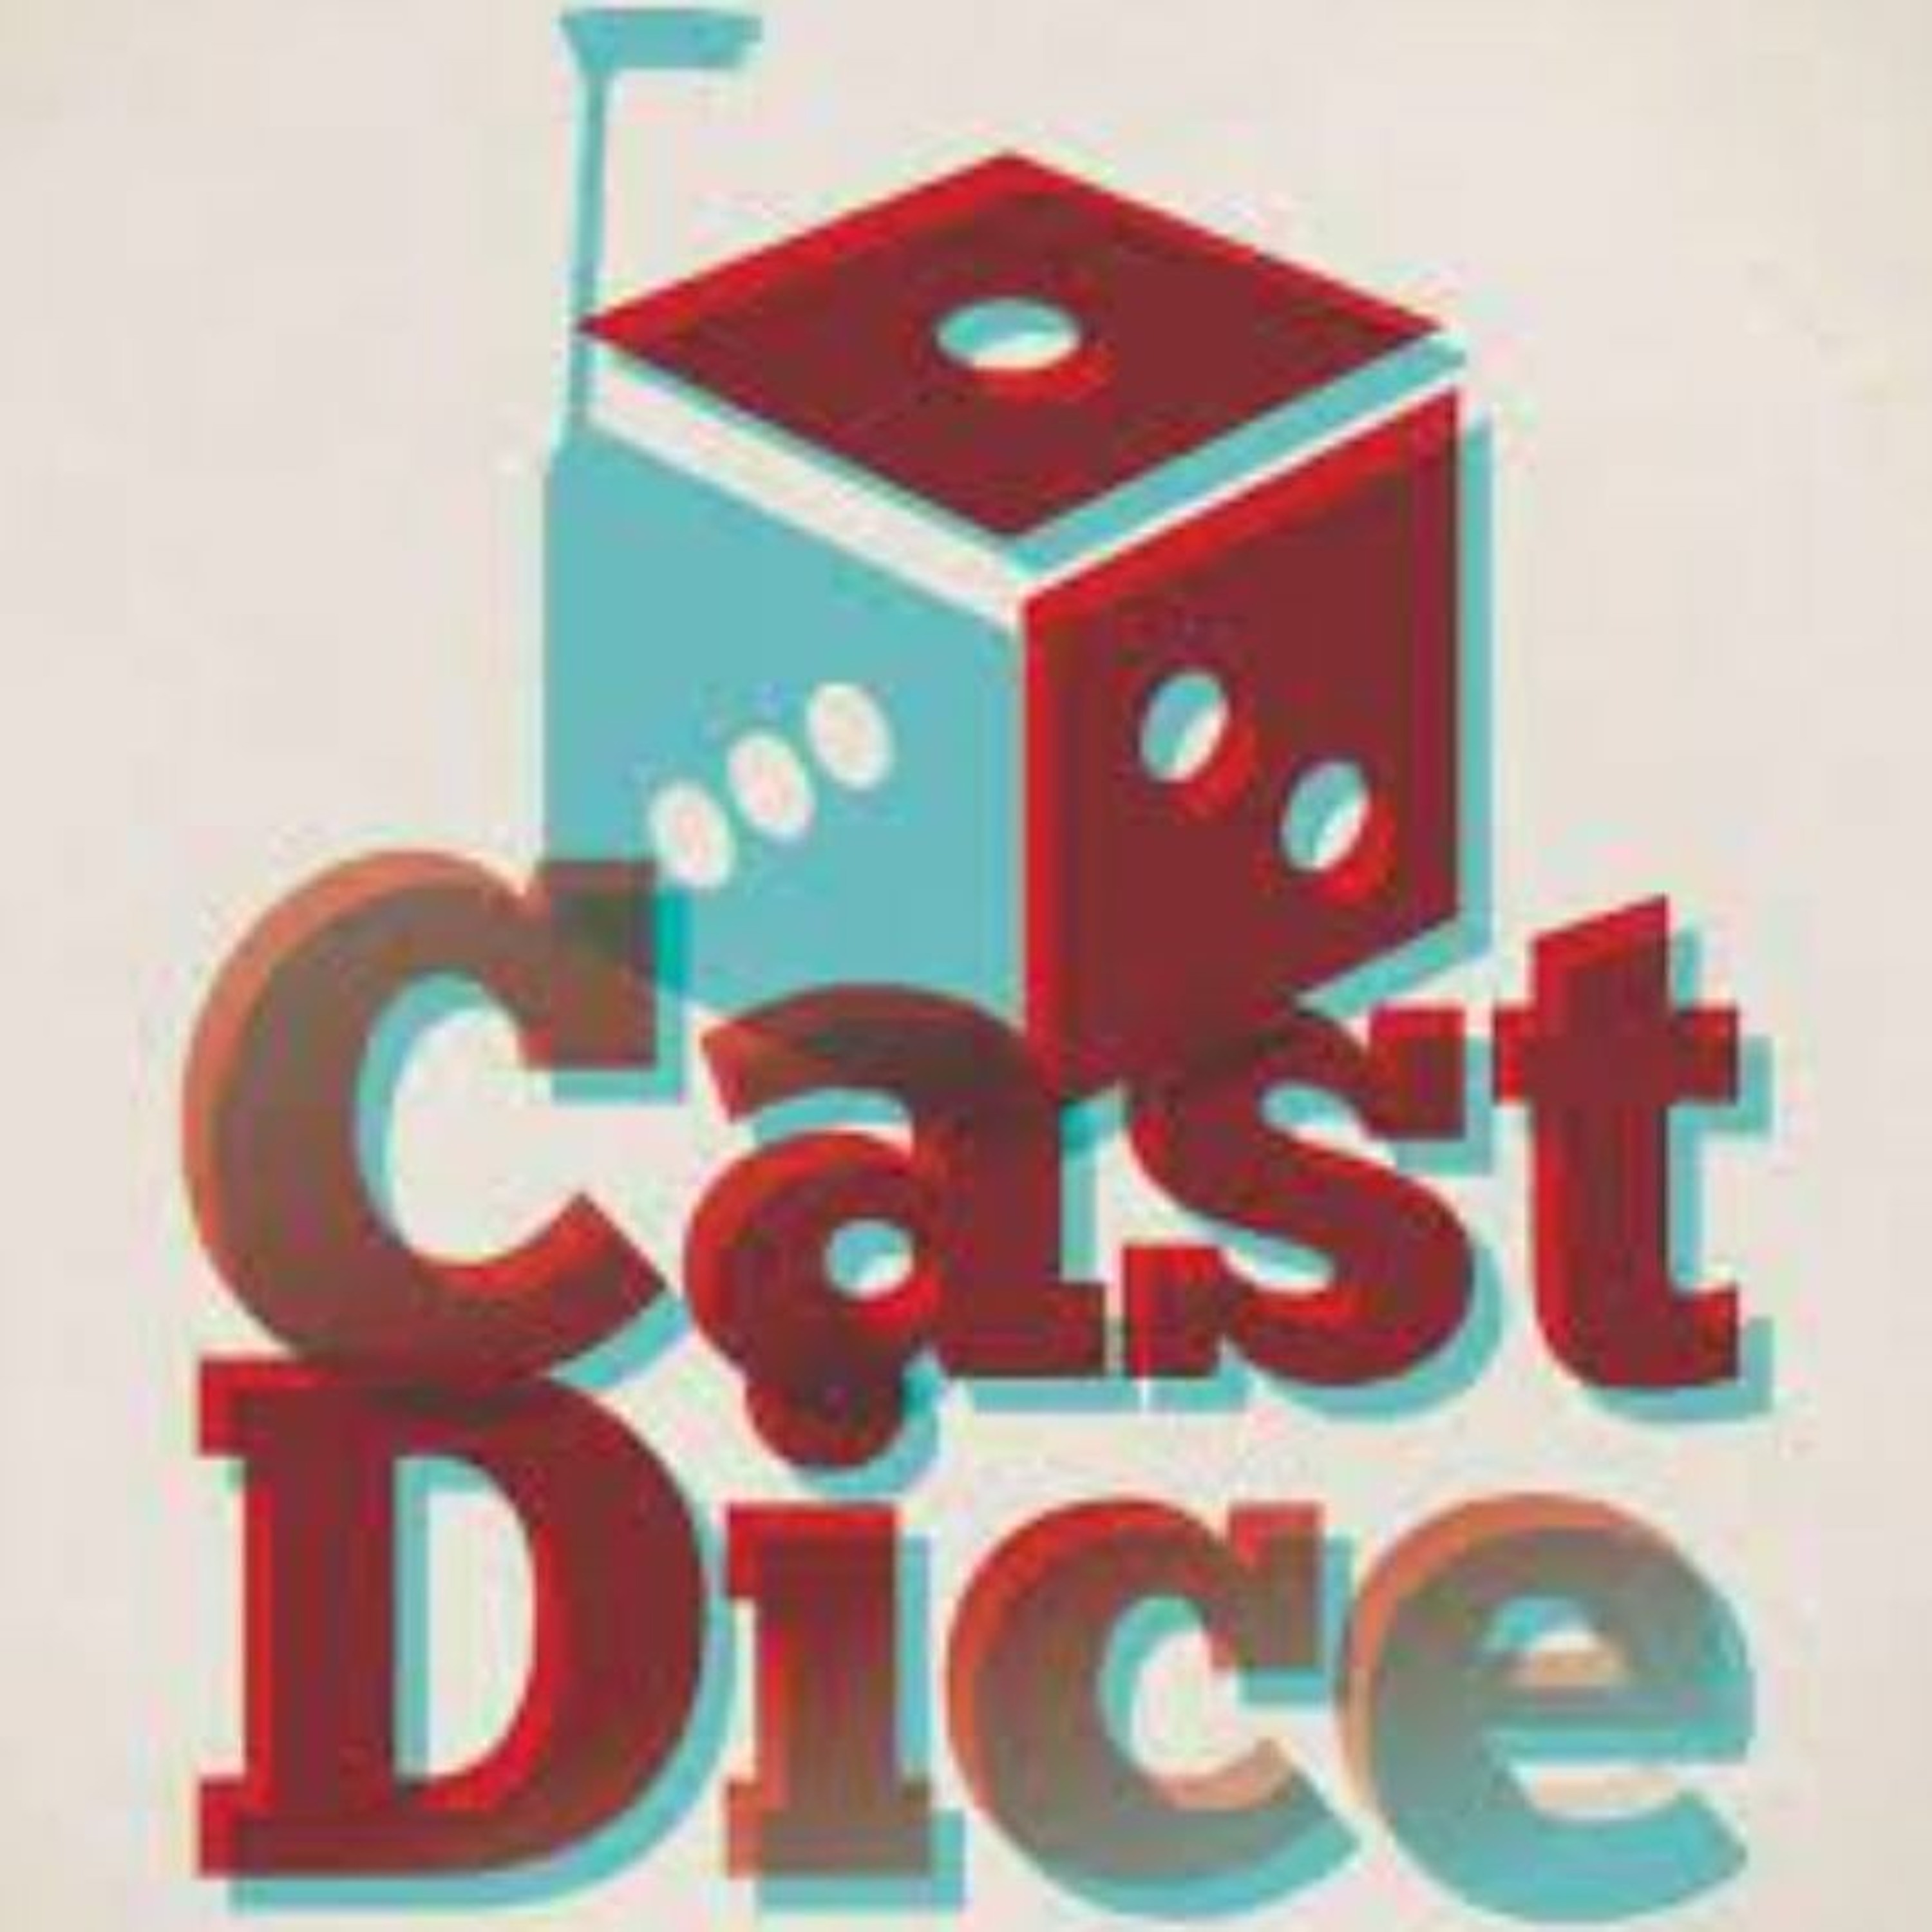 The Cast Dice Podcast - Ep 202 - KNIL 1936 - 1942 With May 40 Miniatures